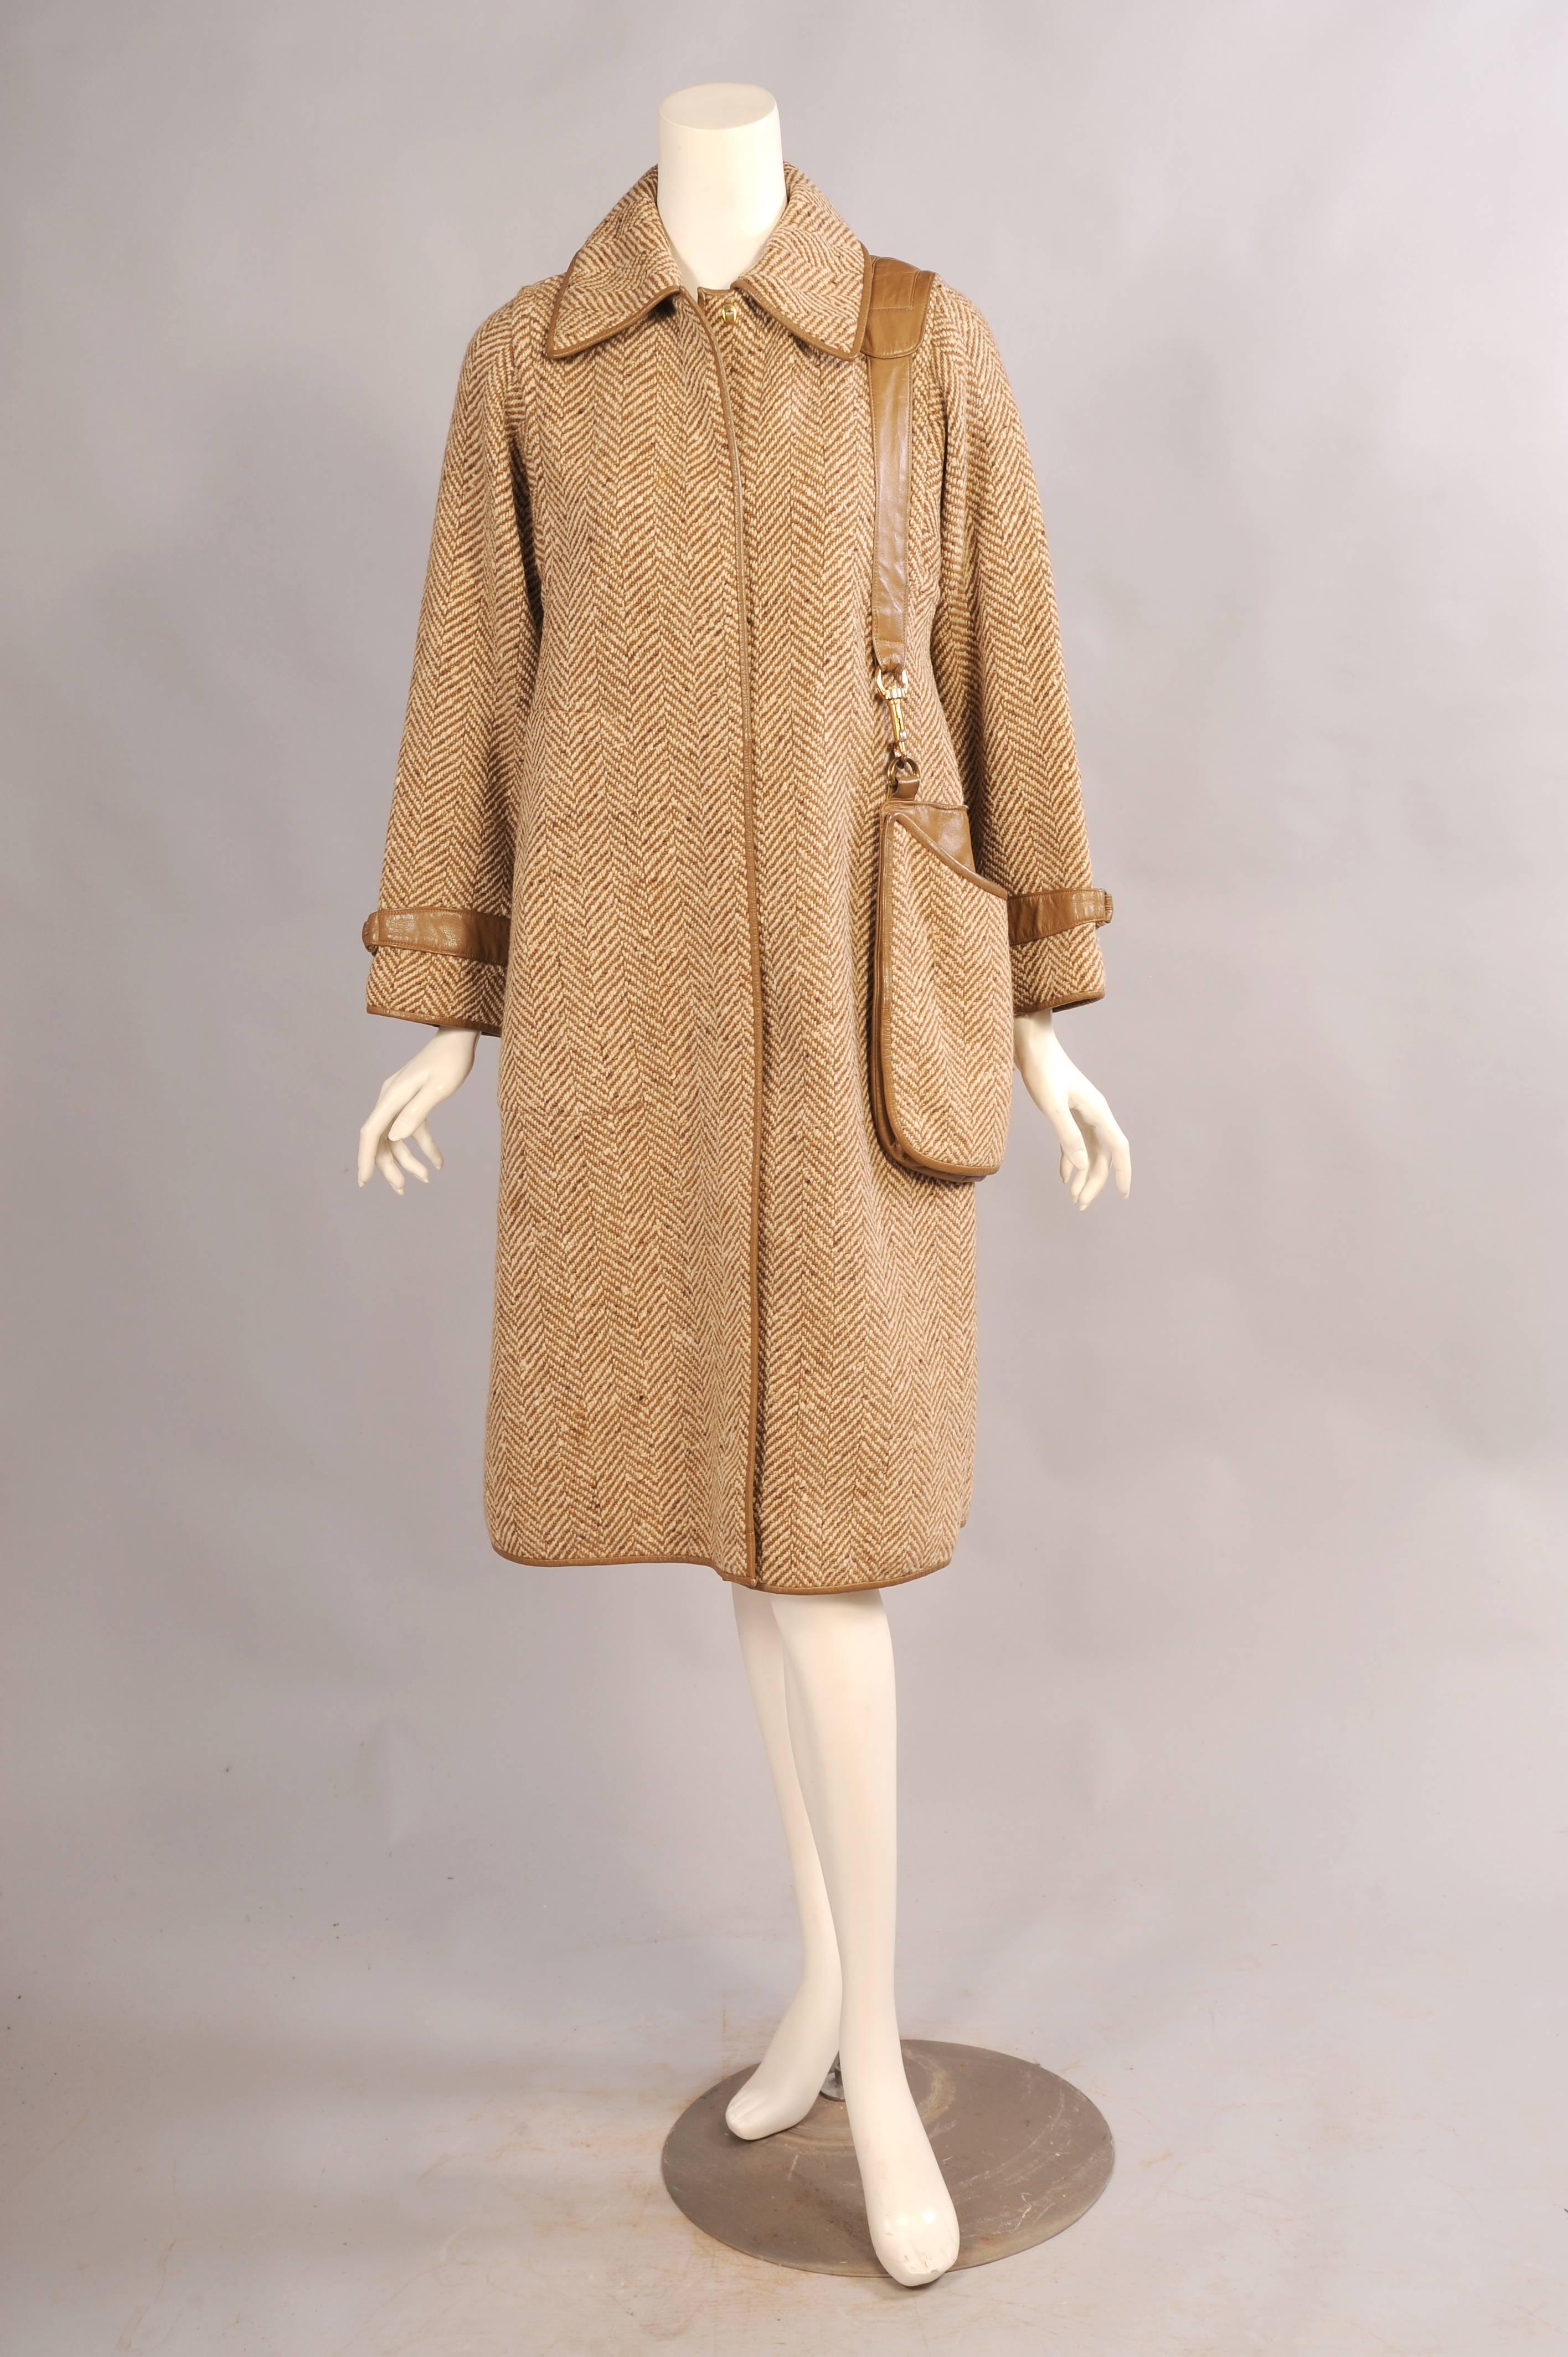 This is such a fabulous and practical design. A gorgeous brown and cream  herringbone patterned wool is trimmed with copious amounts of brown leather. The front, the hem and cuffs are all banded in leather. The collar is lined with leather and the